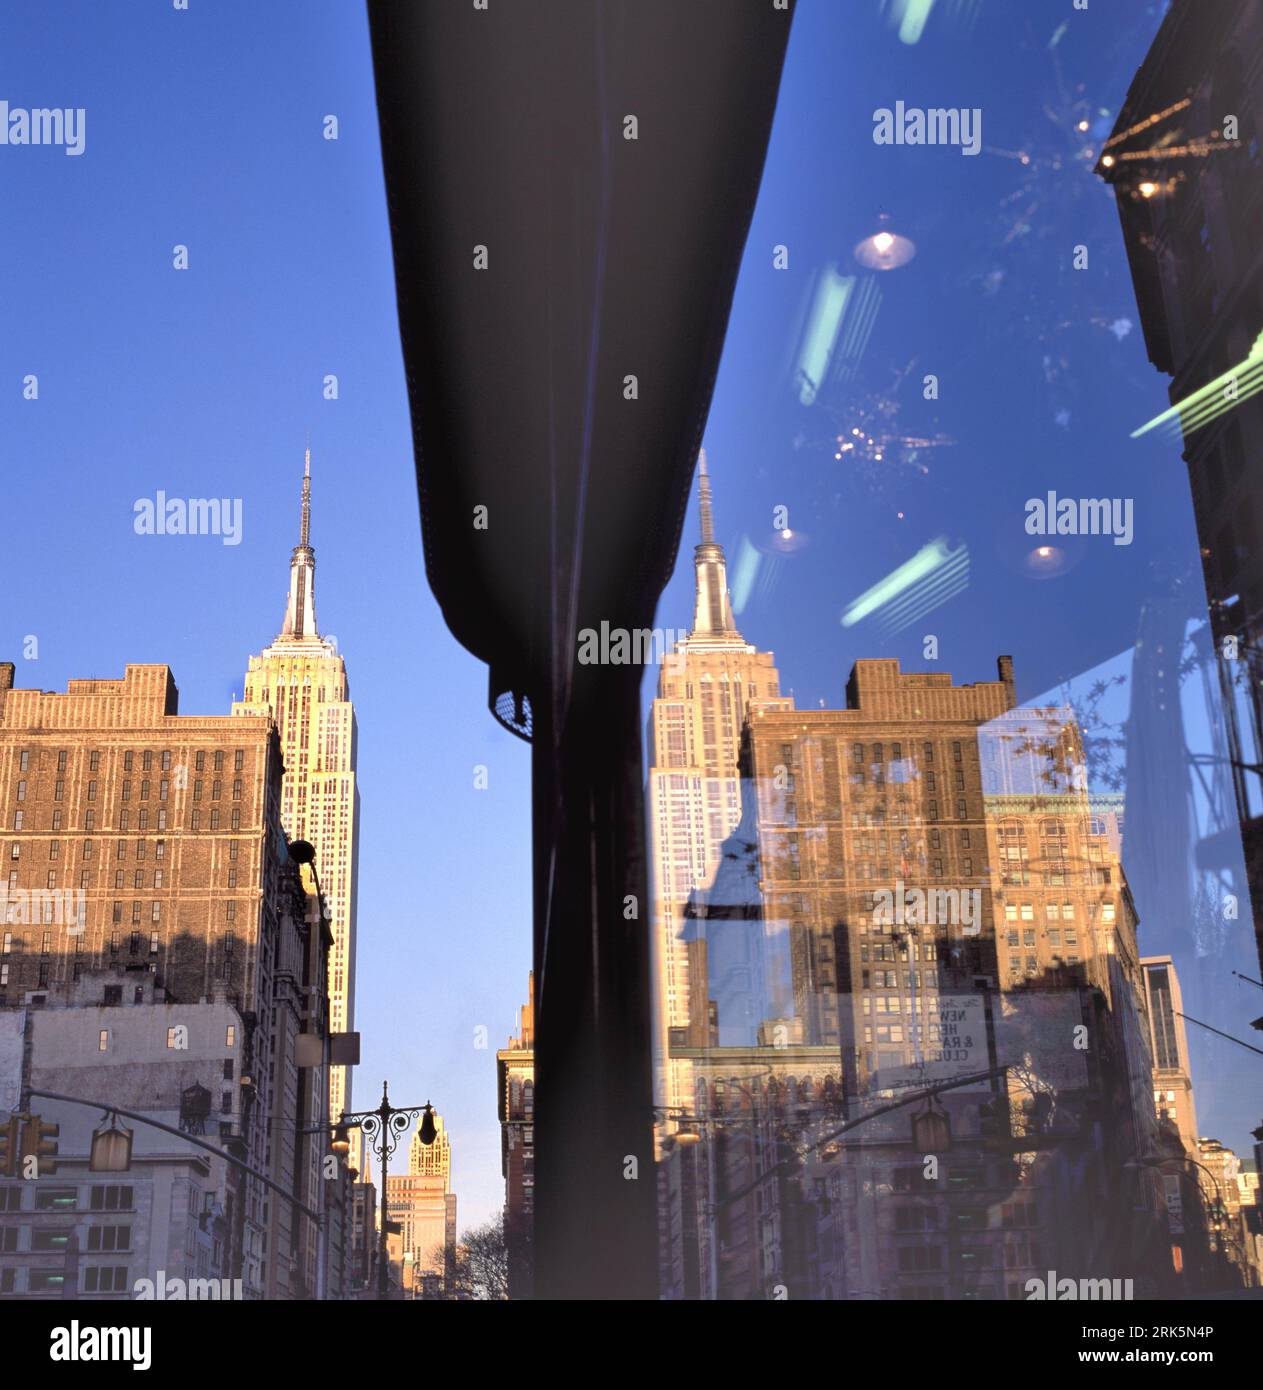 View looking up of the Empire State Building, with reflection in the window of a building in the same street, New York City, USA. Stock Photo